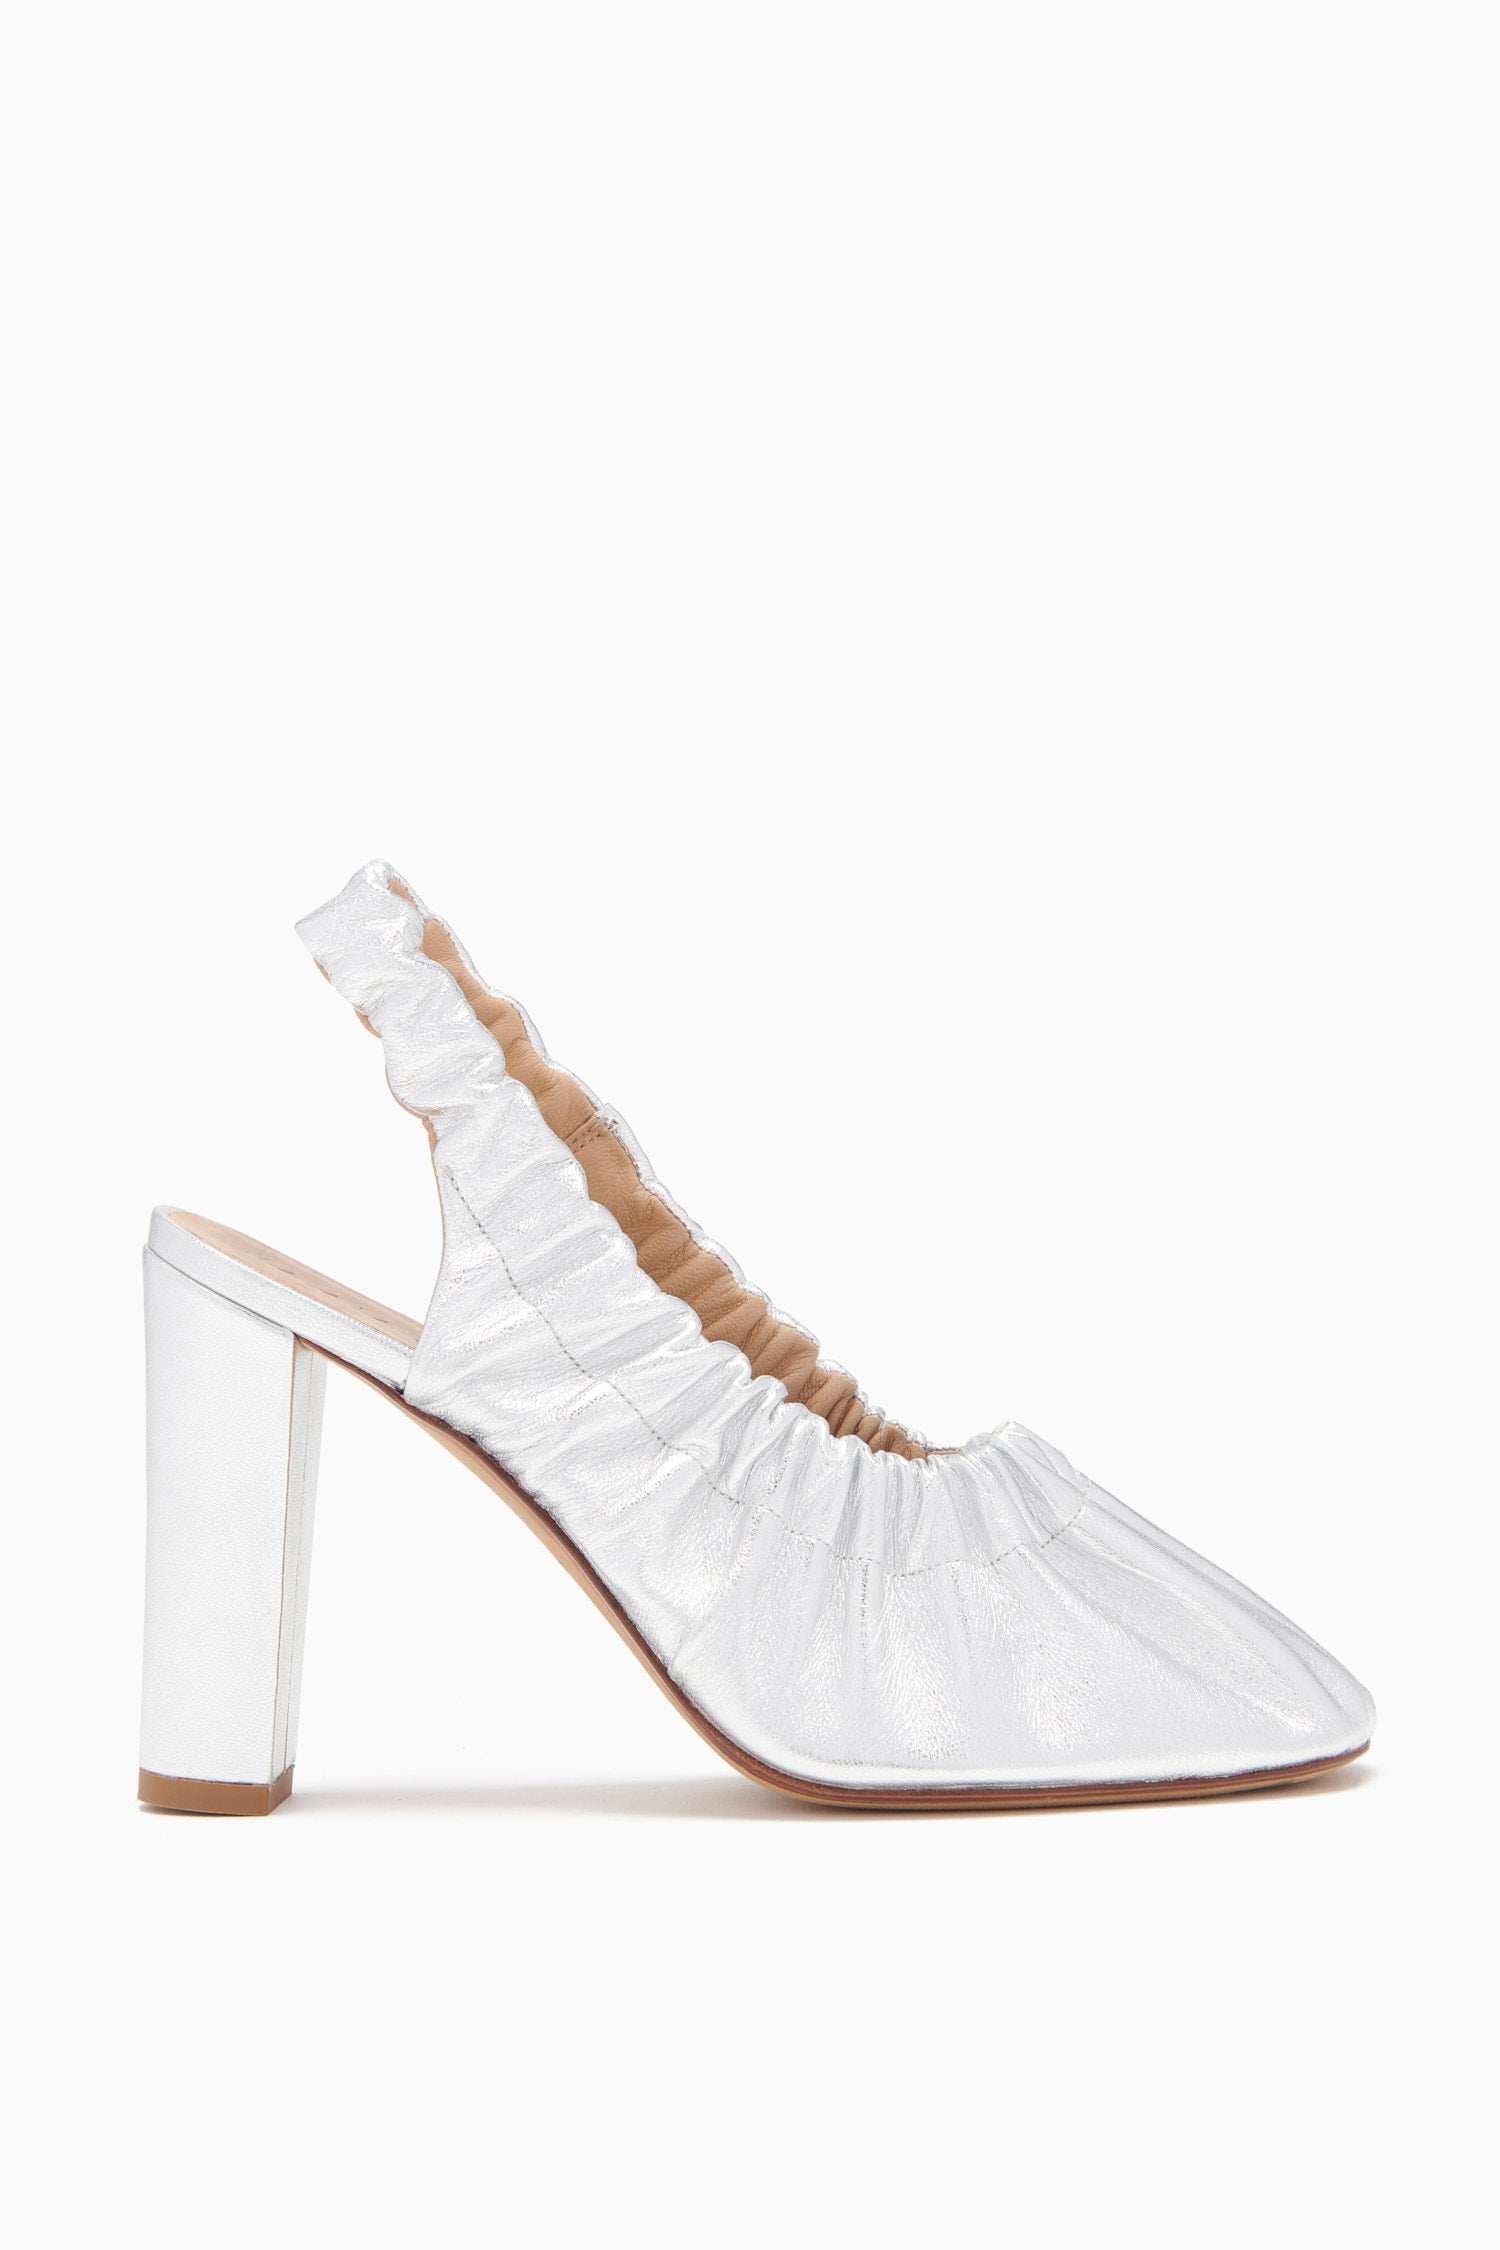 Ulla Johnson Lucia Ruched High Heel - Silver